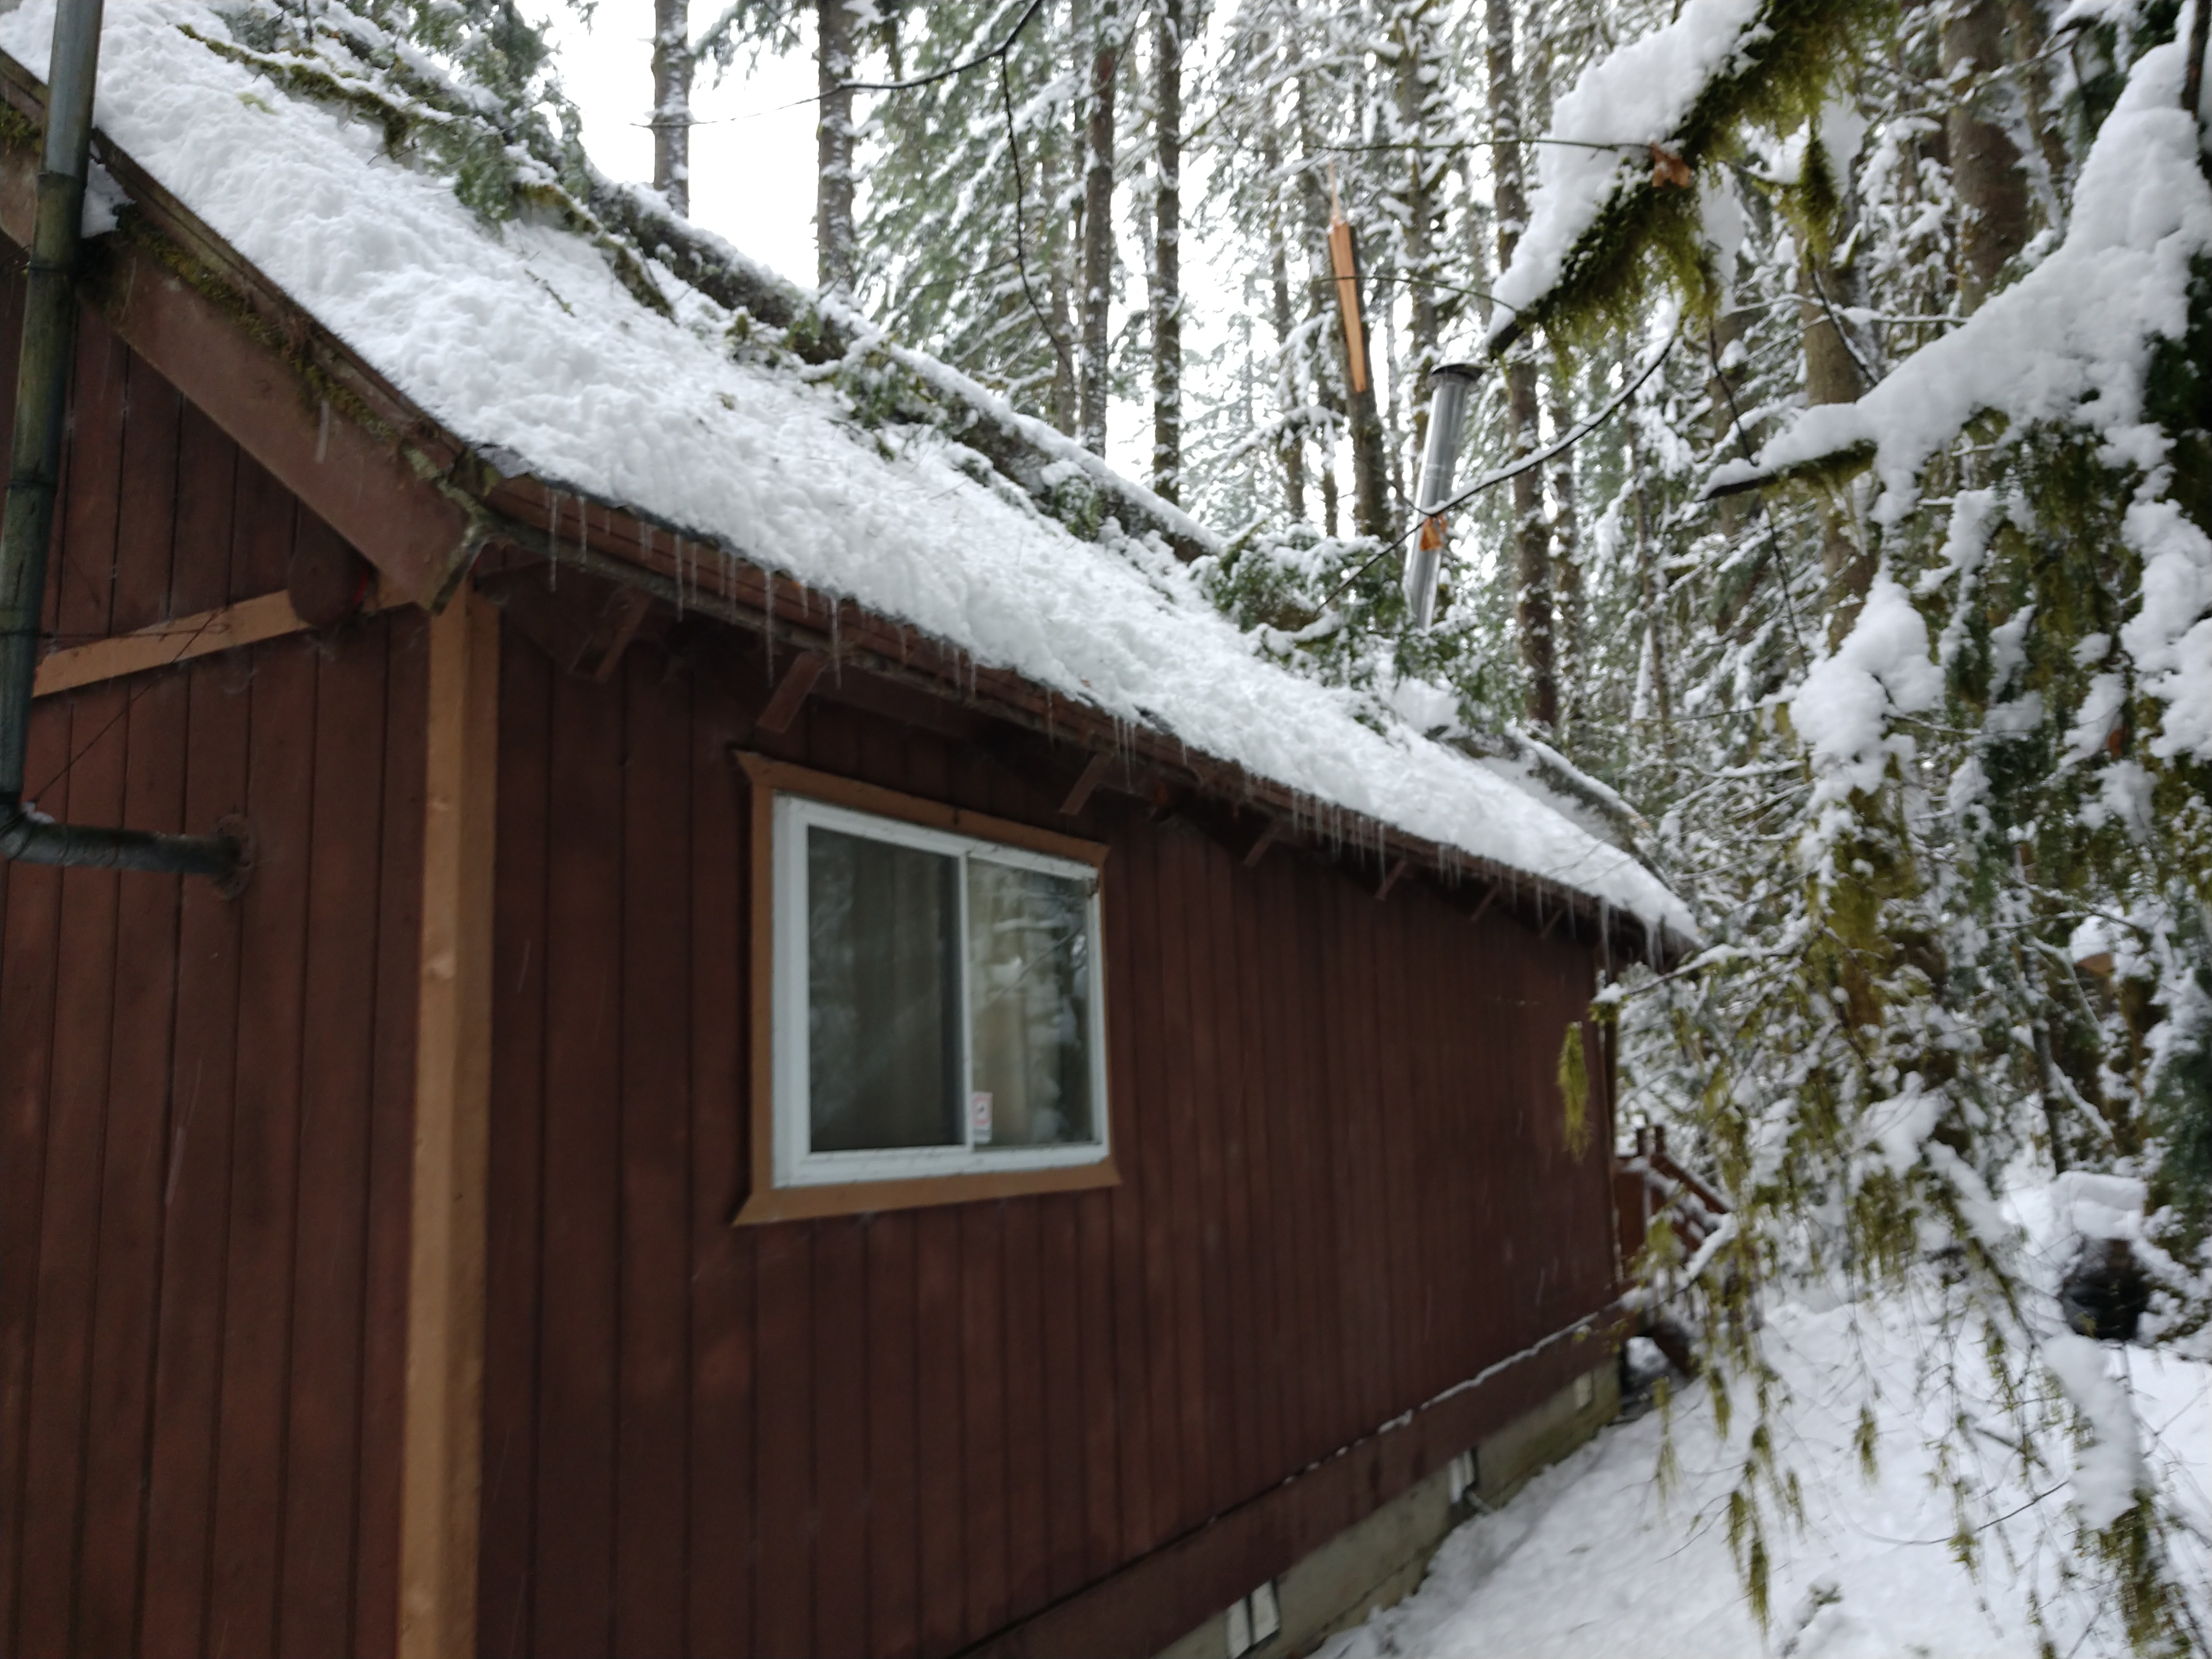 A cabin covered in snow with a tree having fallen on its roof